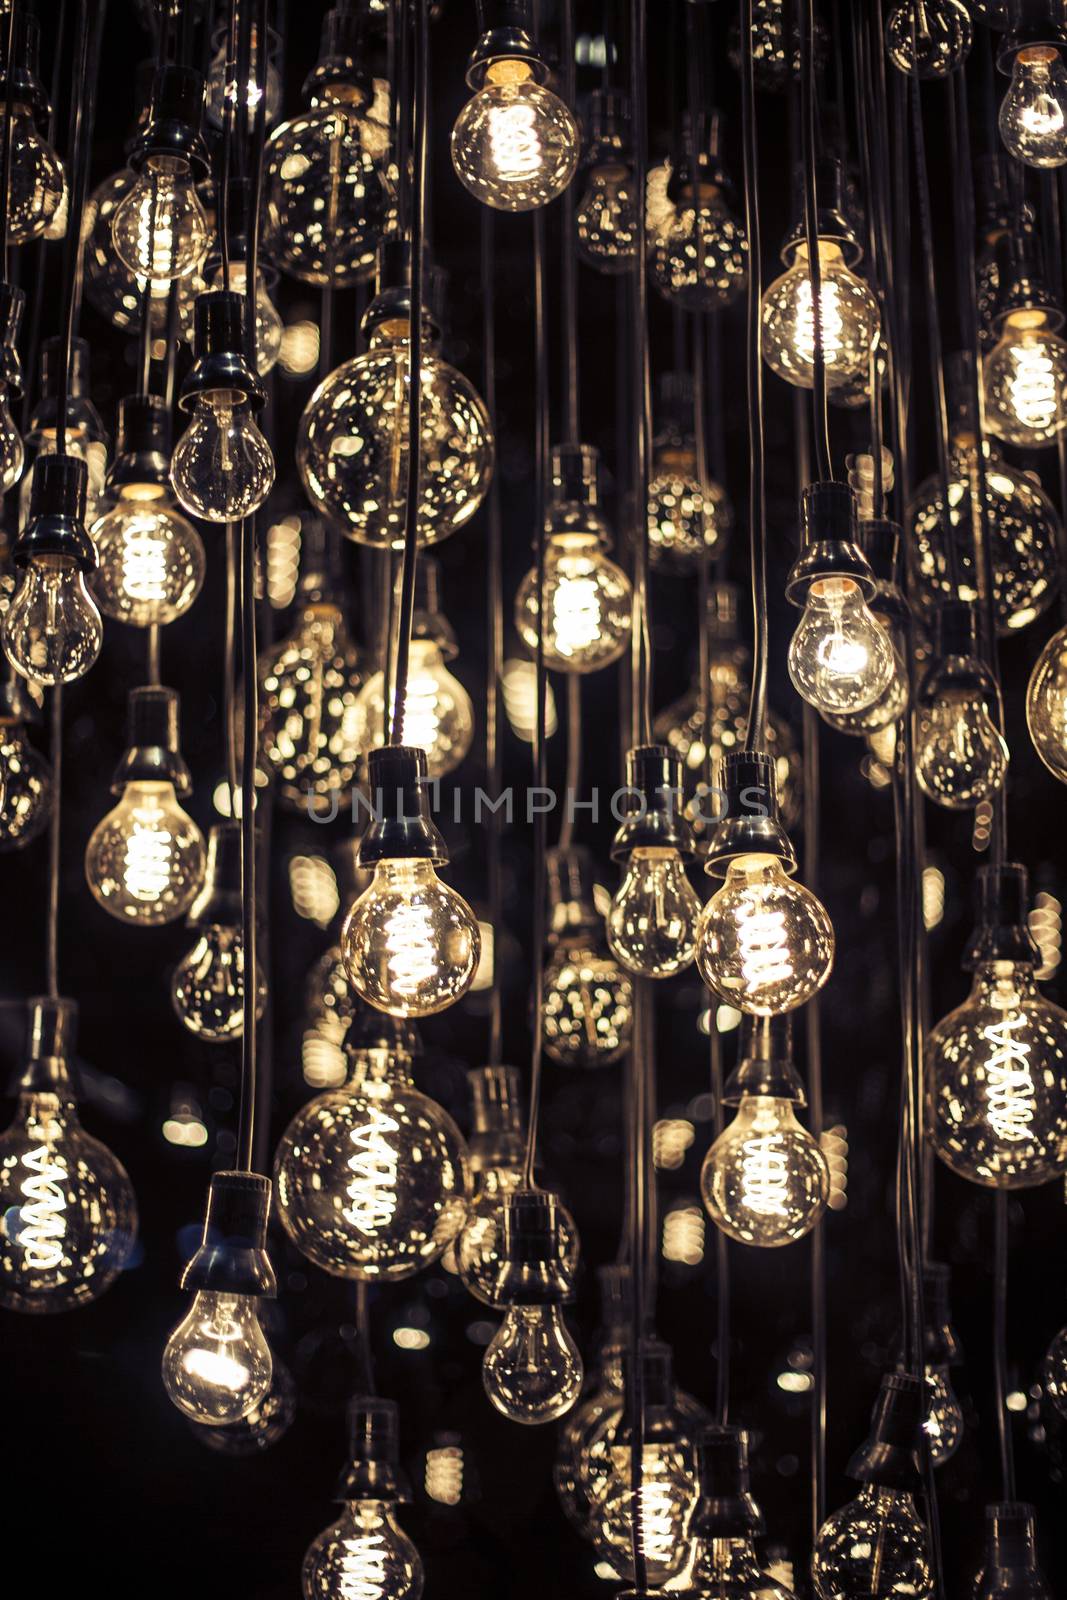 Group of hanging filament lamps by Vanzyst